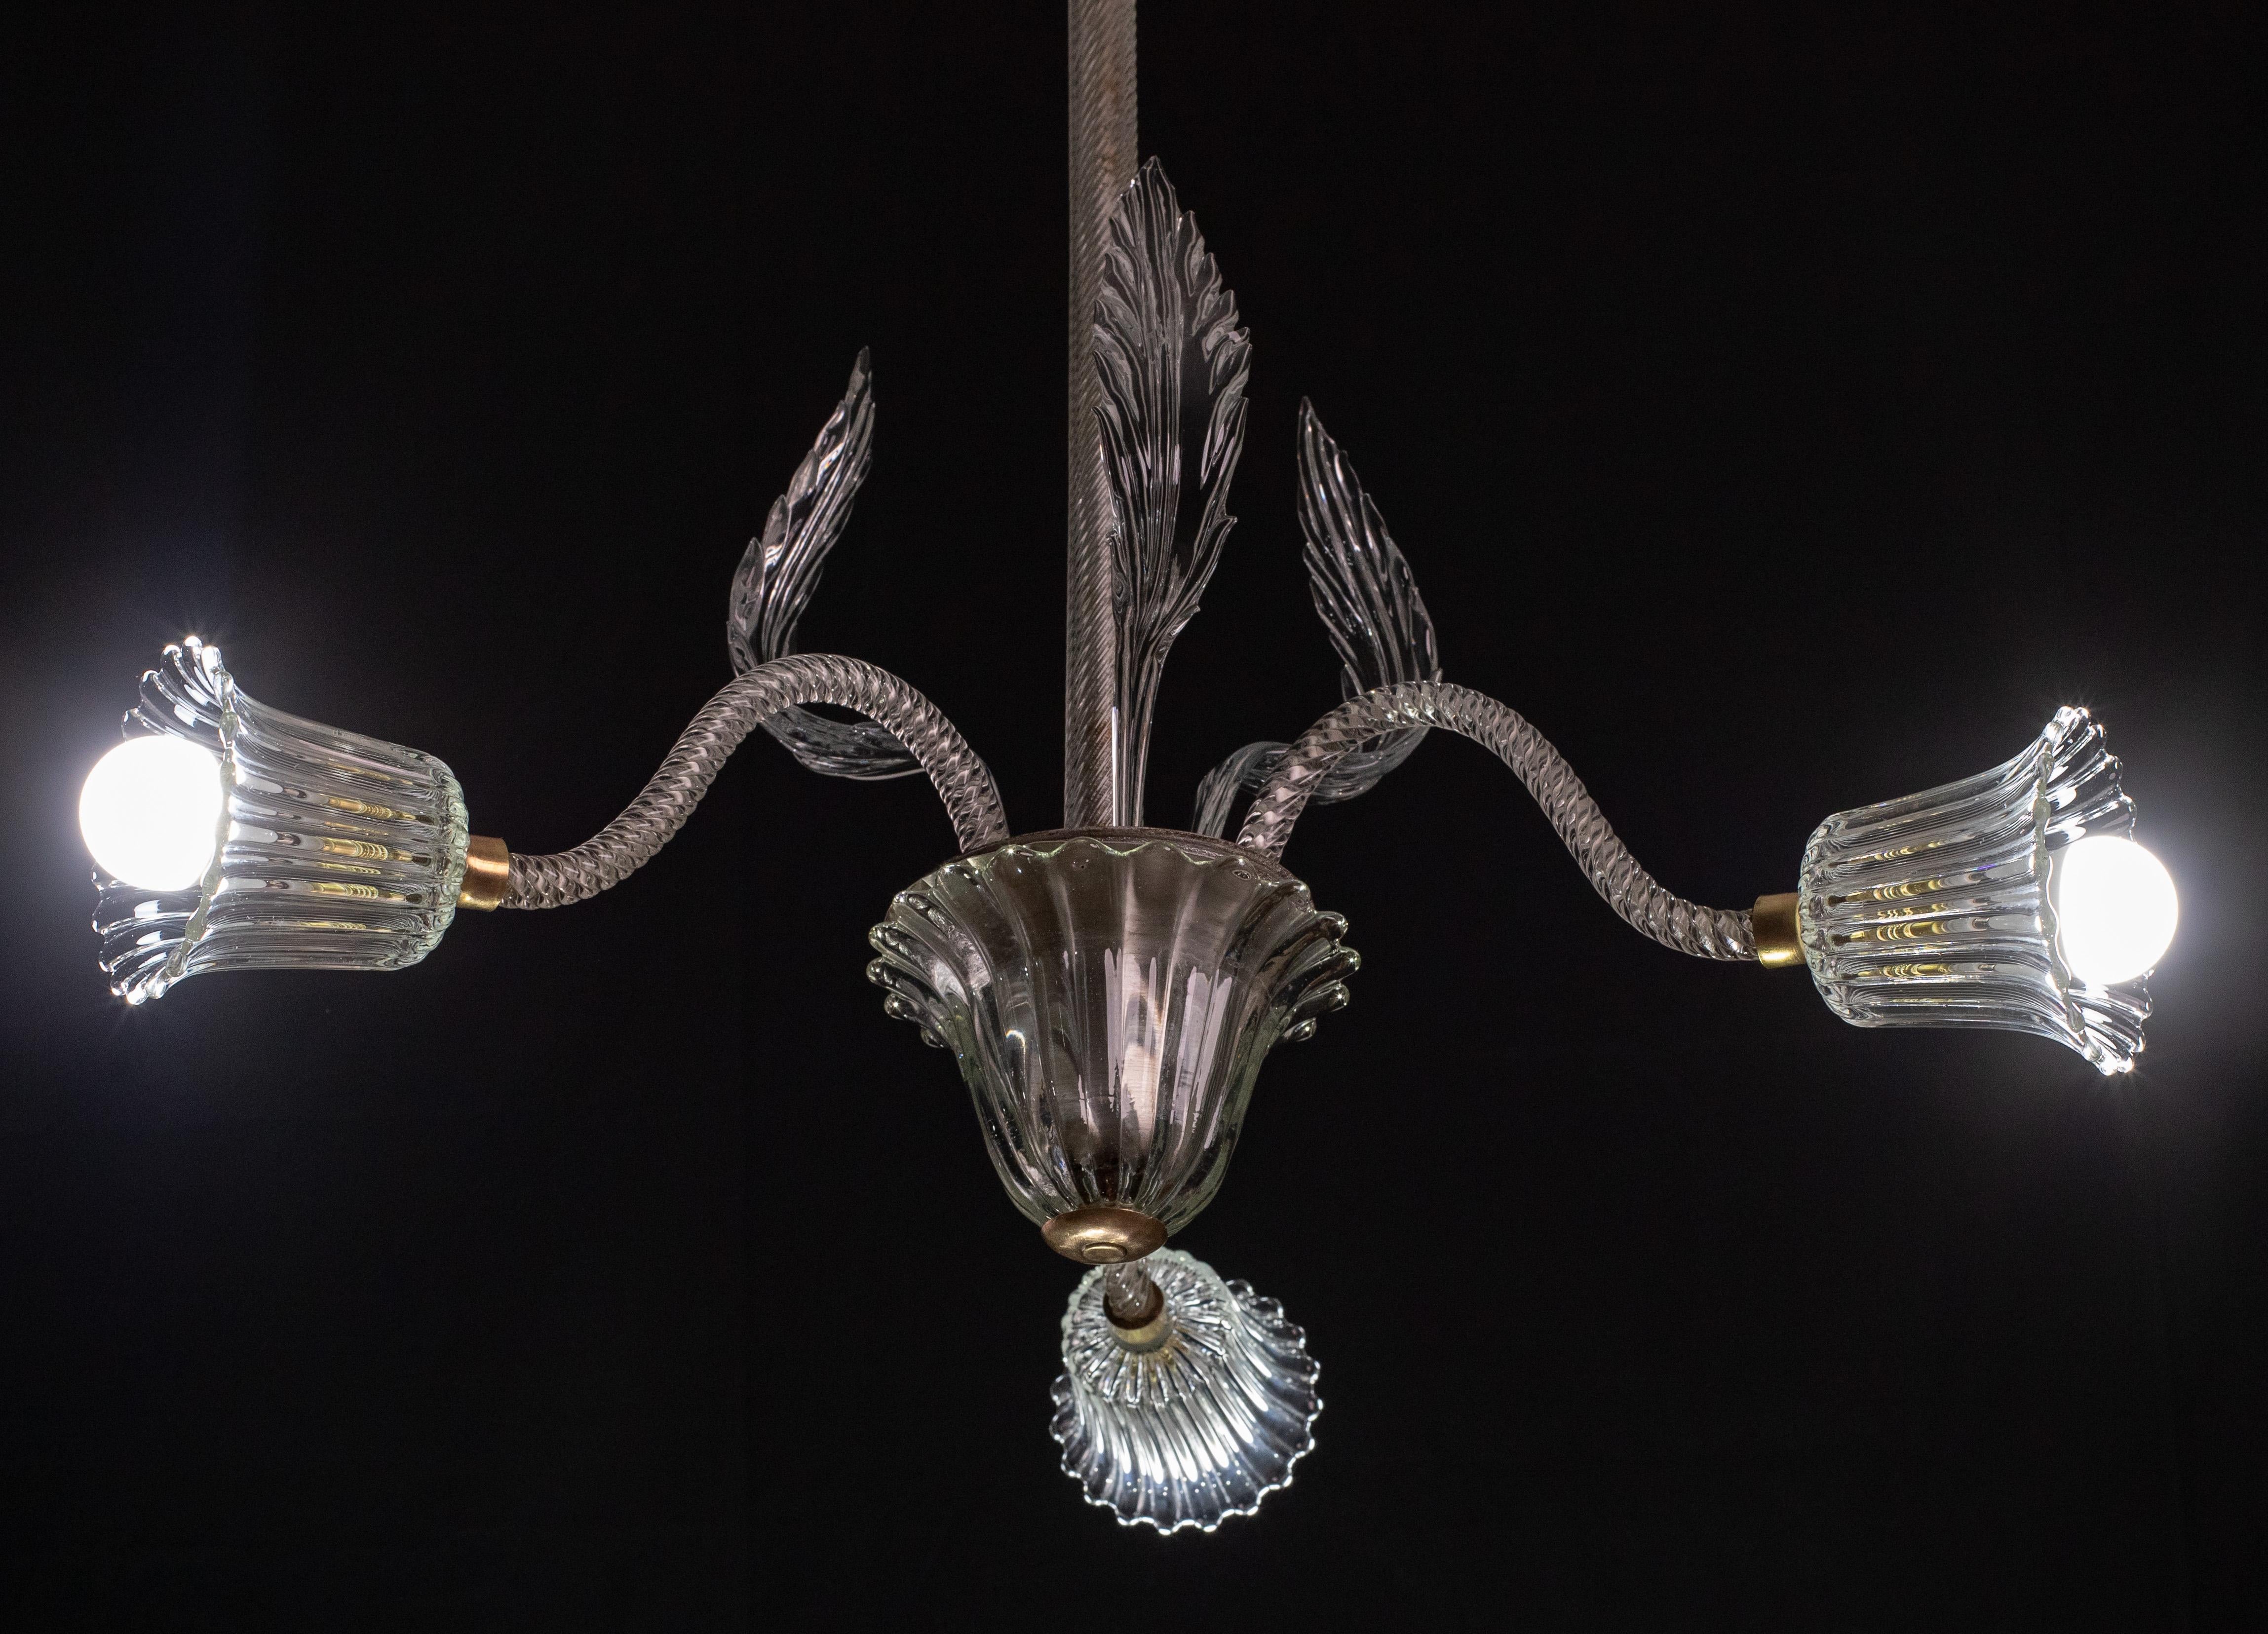 Mid-20th Century Art Deco Chandelier by Ercole Barovier Murano 1940s For Sale